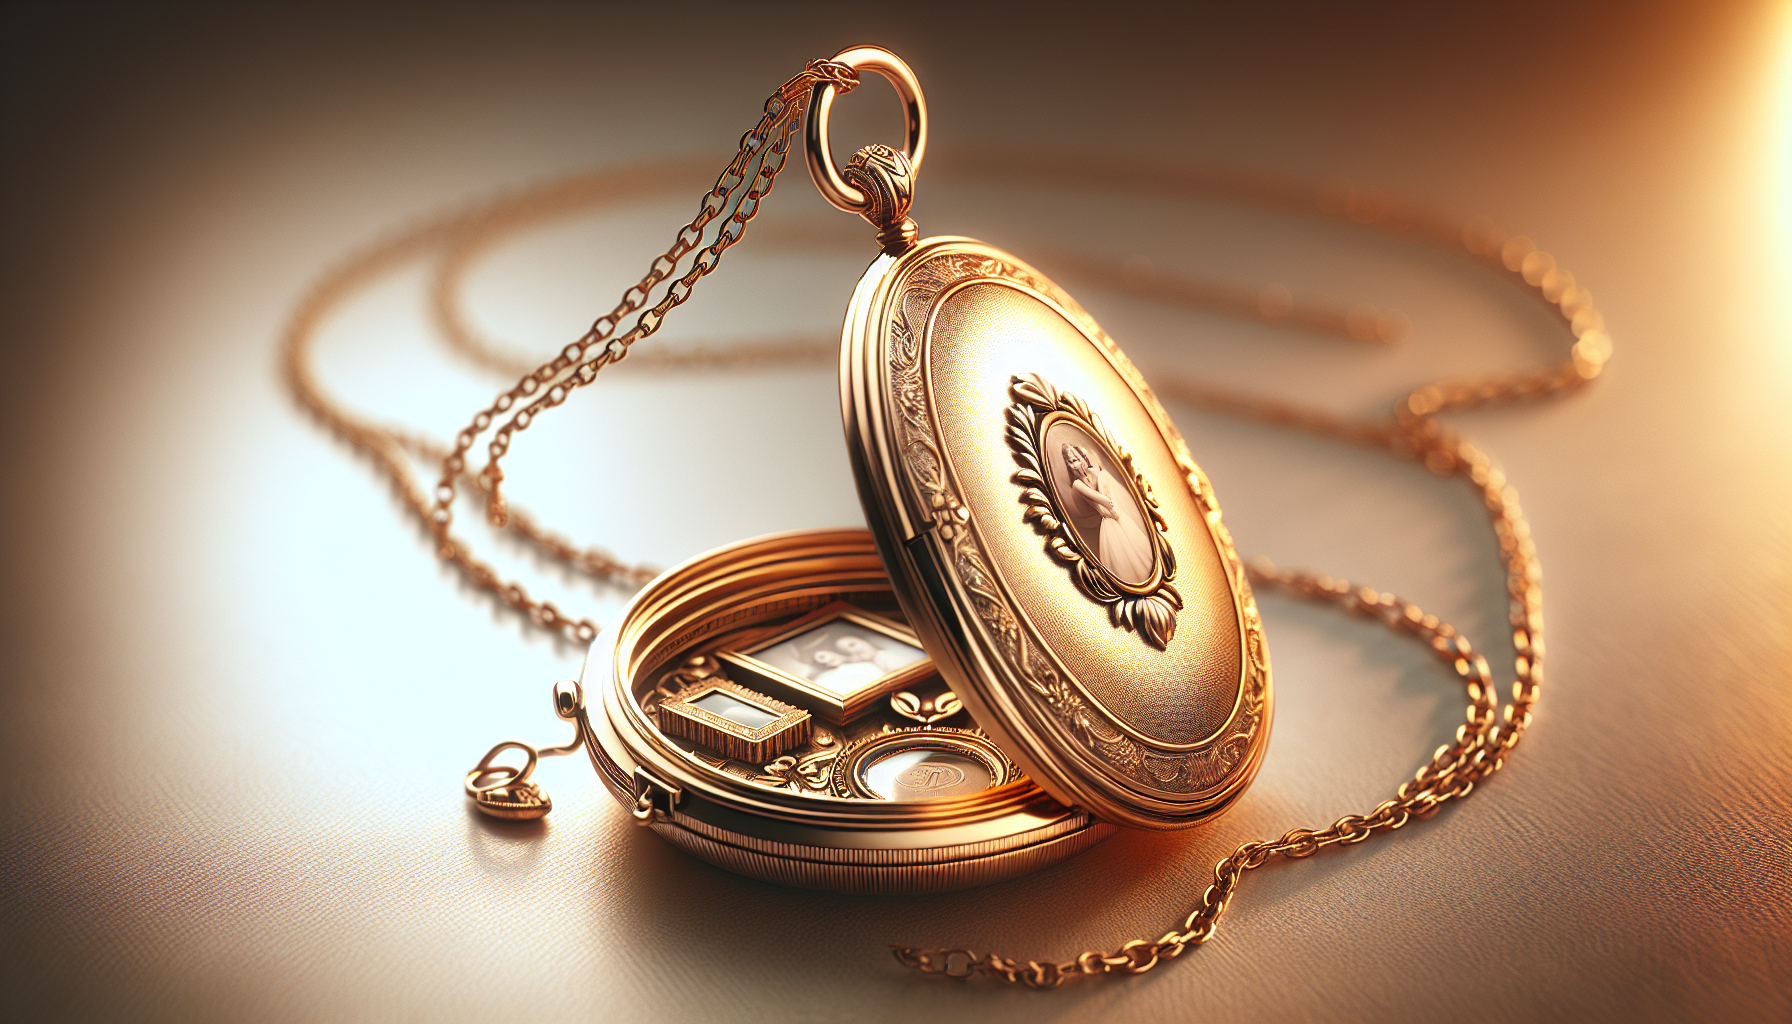 A beautiful depiction revealing the classic charm of locket necklaces. This timeless accessory, usually made of gold or silver, captures a sense of nostalgia. The locket delicately hangs on a finely c